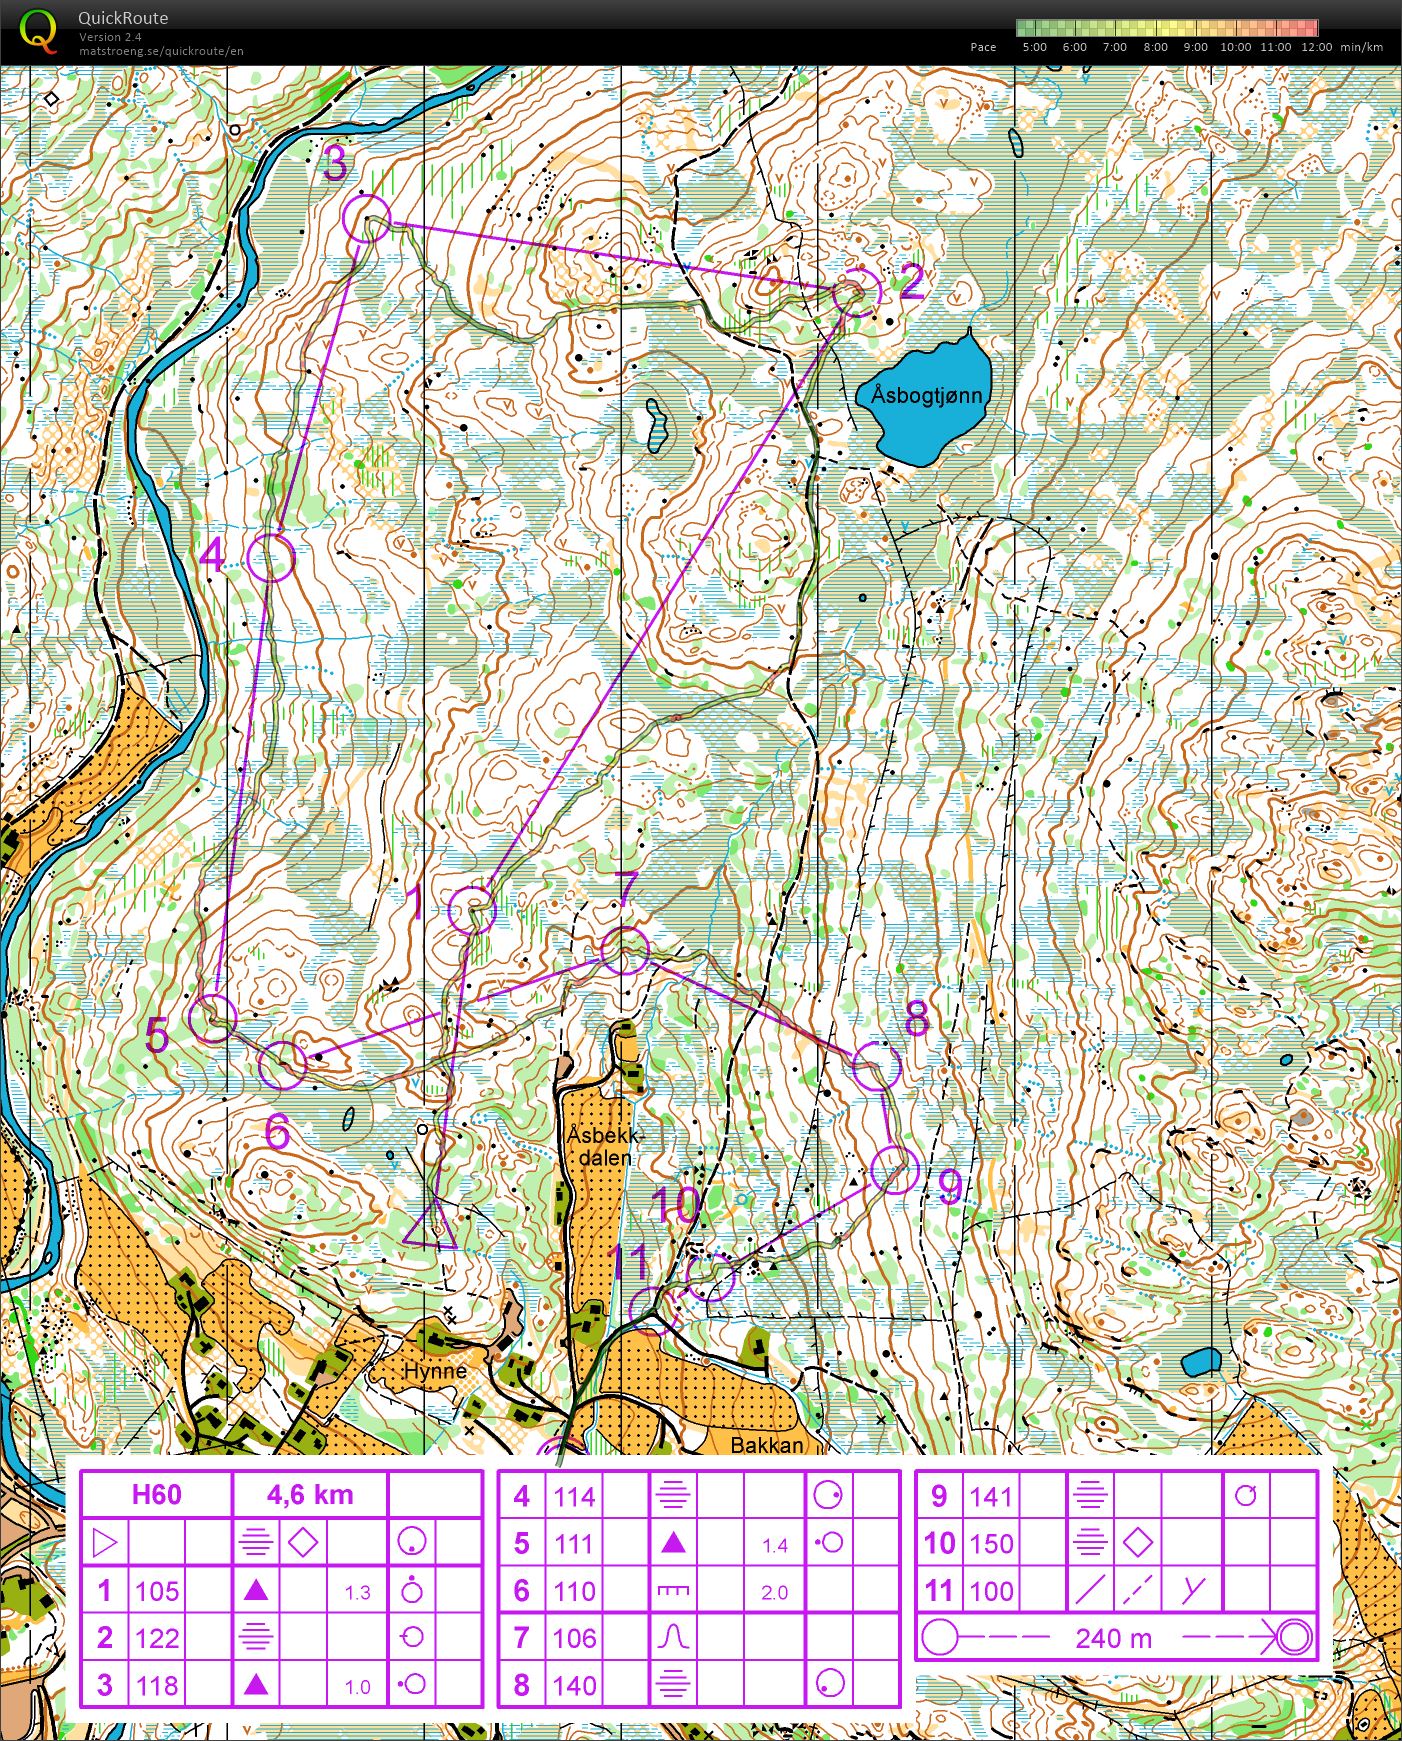 Re-run of H60 Long course from VM in Rauland (12.10.2017)